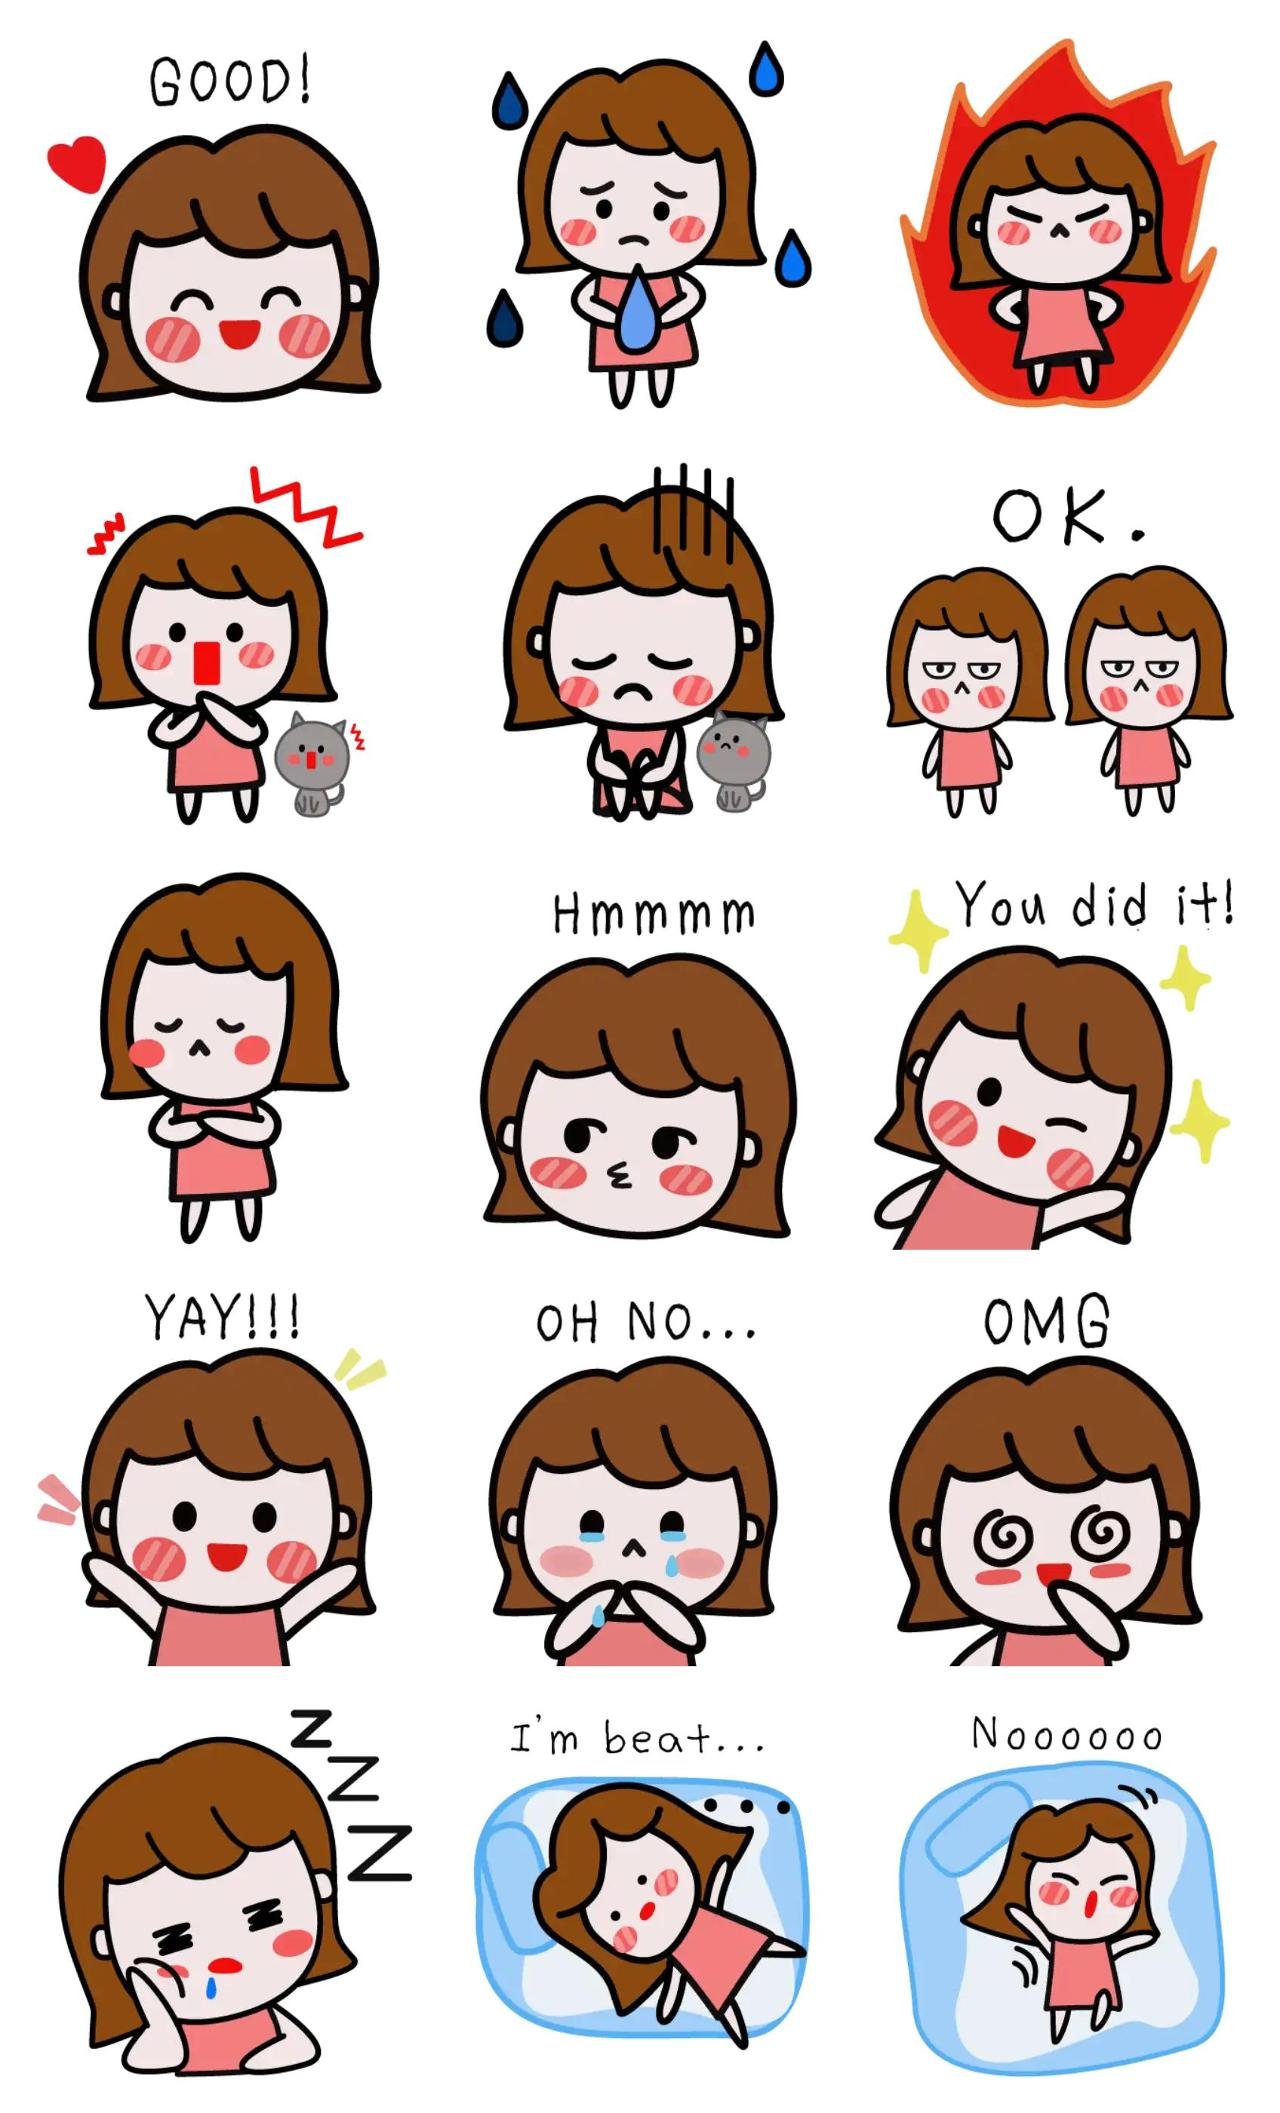 Hello Mia Ver. 2 Animation/Cartoon,People sticker pack for Whatsapp, Telegram, Signal, and others chatting and message apps